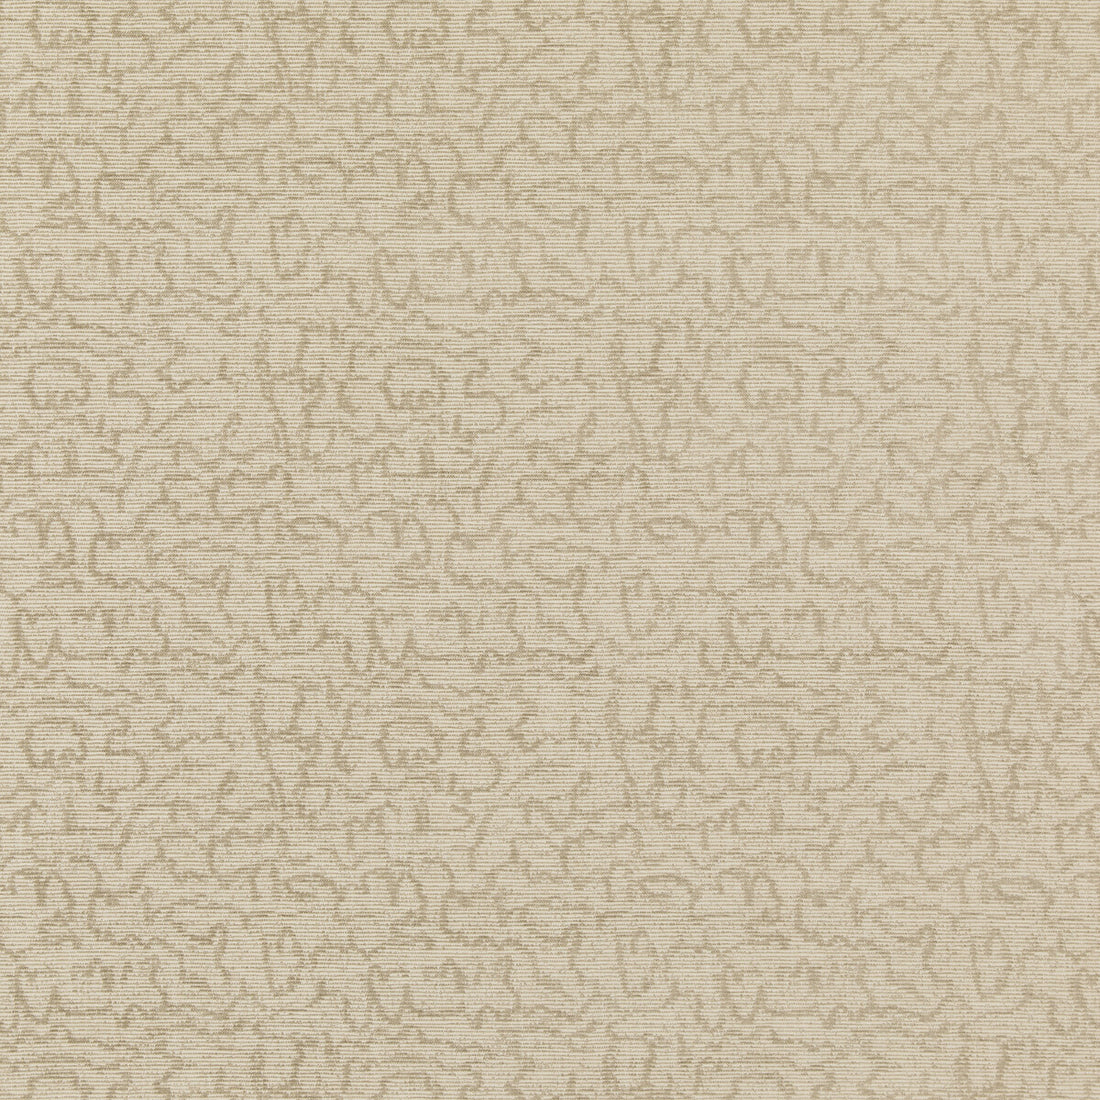 Crescendo fabric in ivory/taupe color - pattern GWF-3734.116.0 - by Lee Jofa Modern in the Kelly Wearstler IV collection